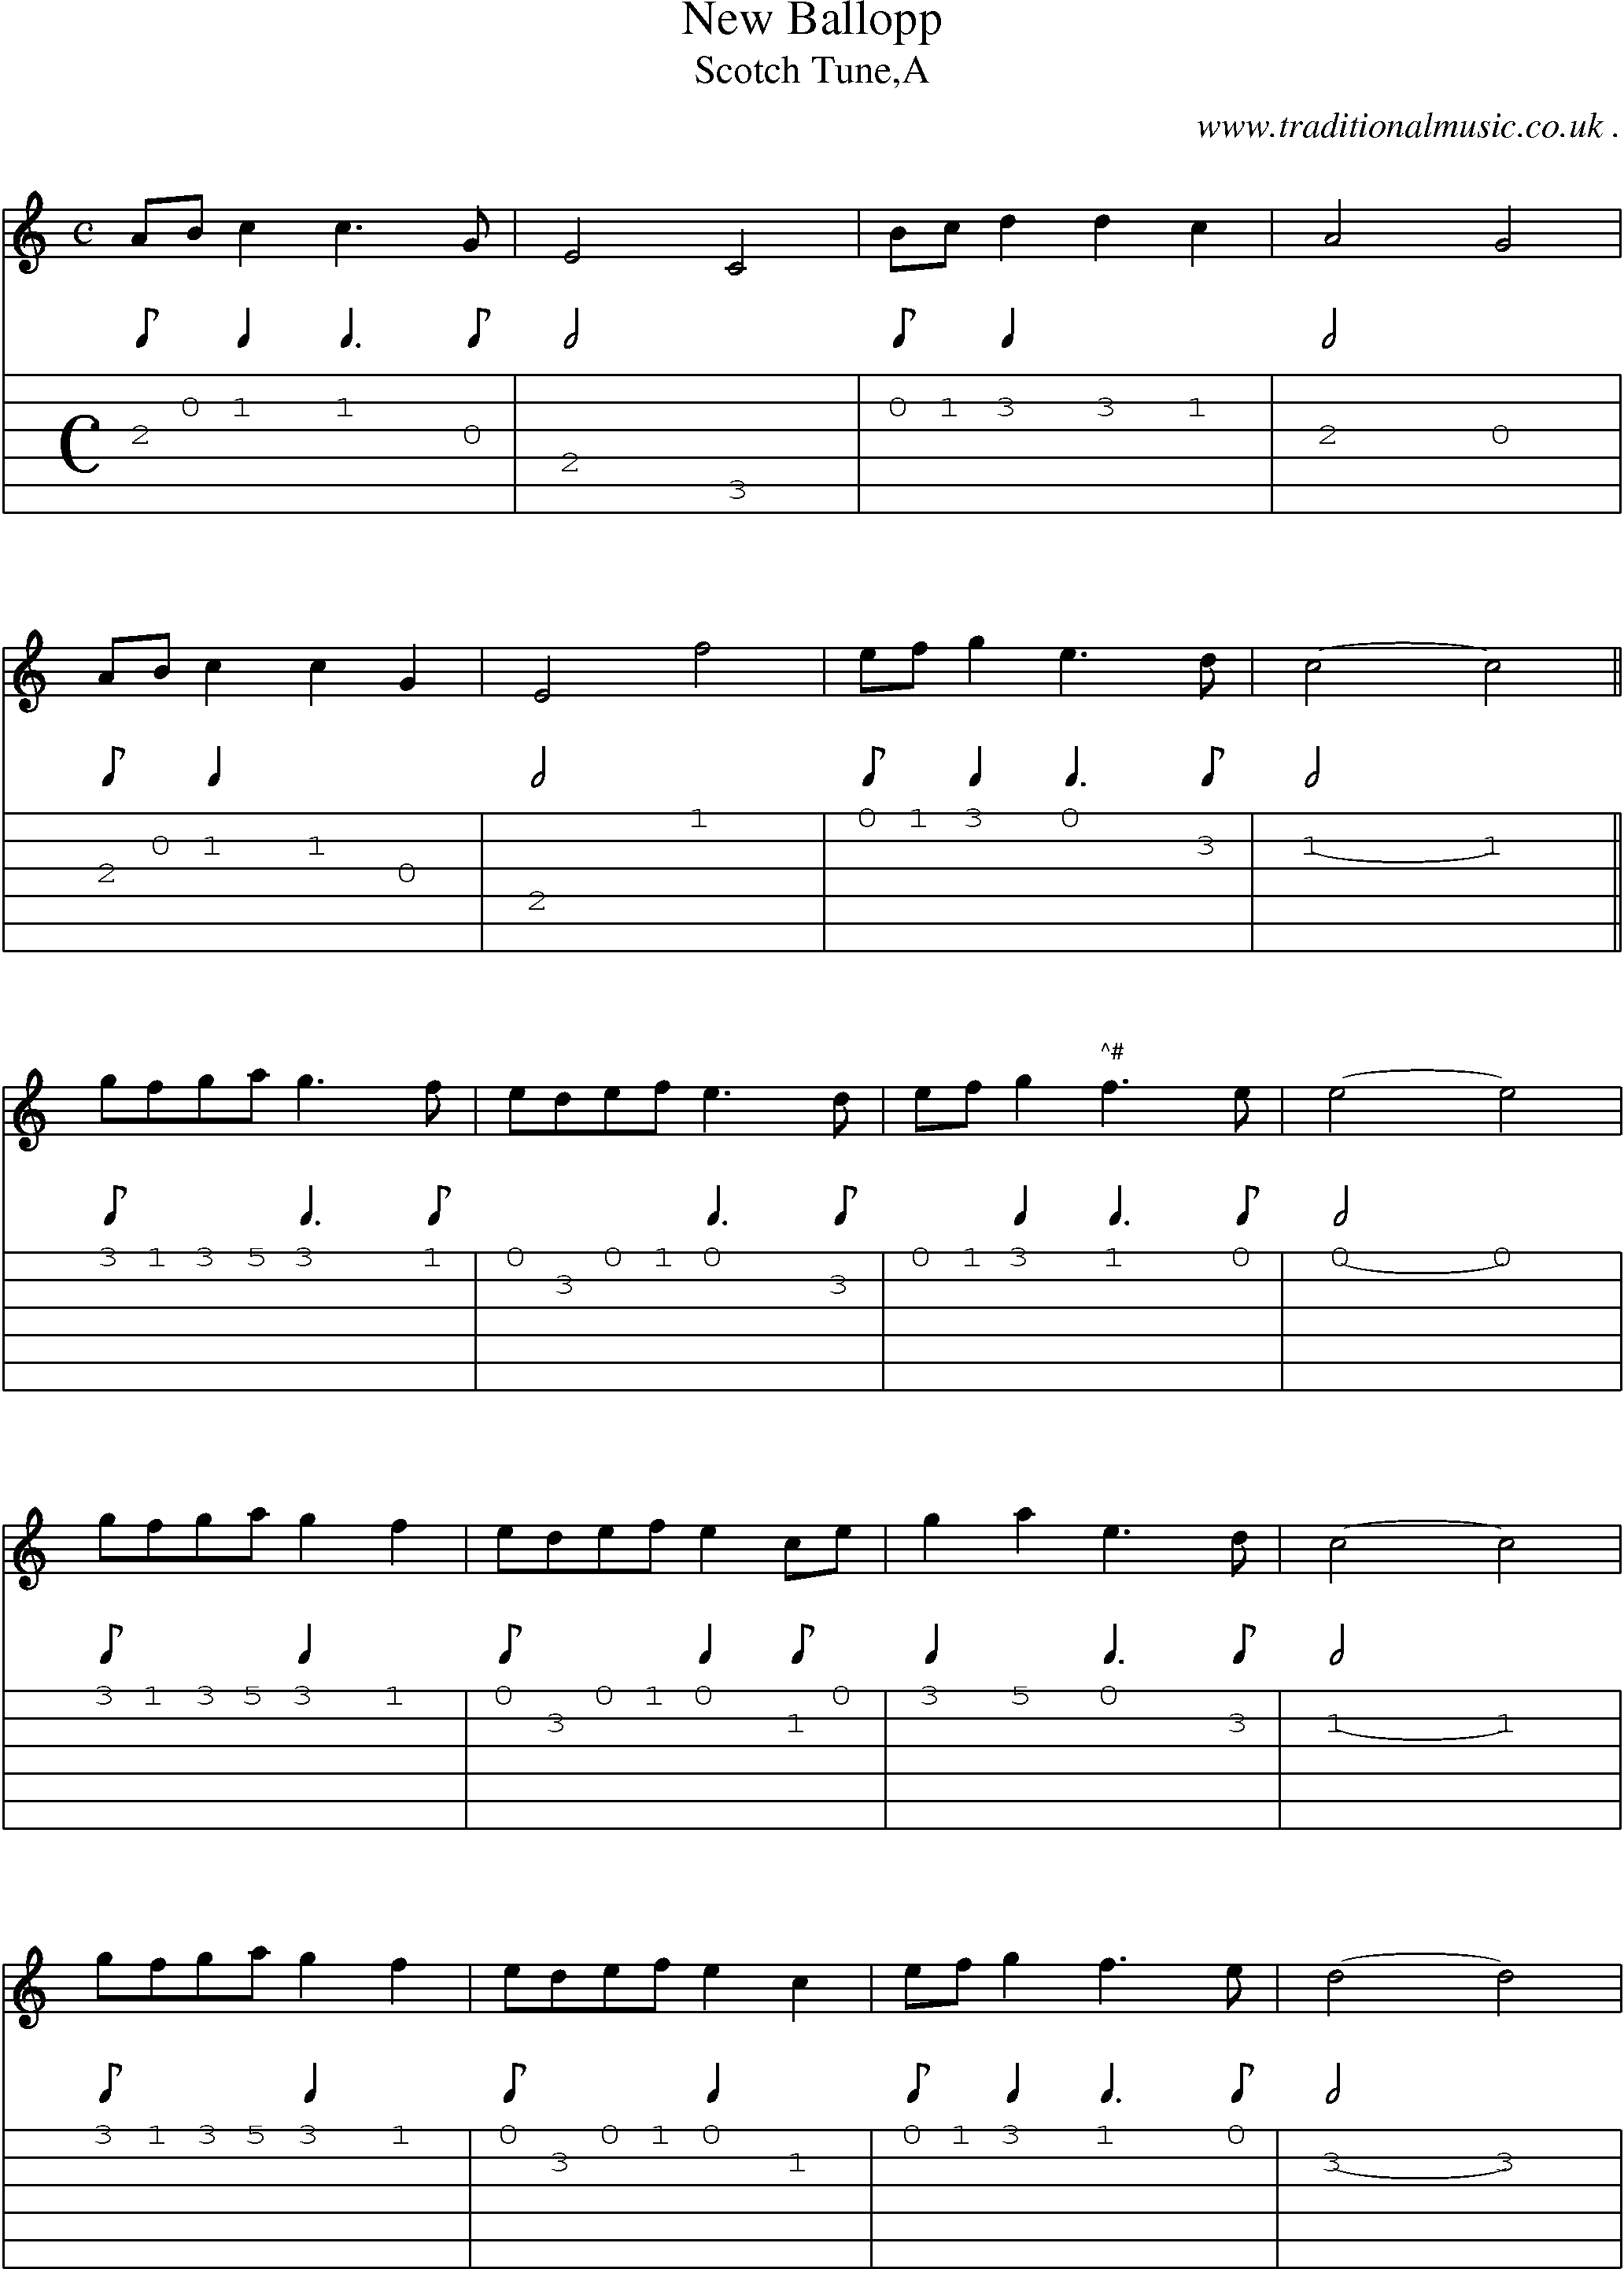 Sheet-Music and Guitar Tabs for New Ballopp